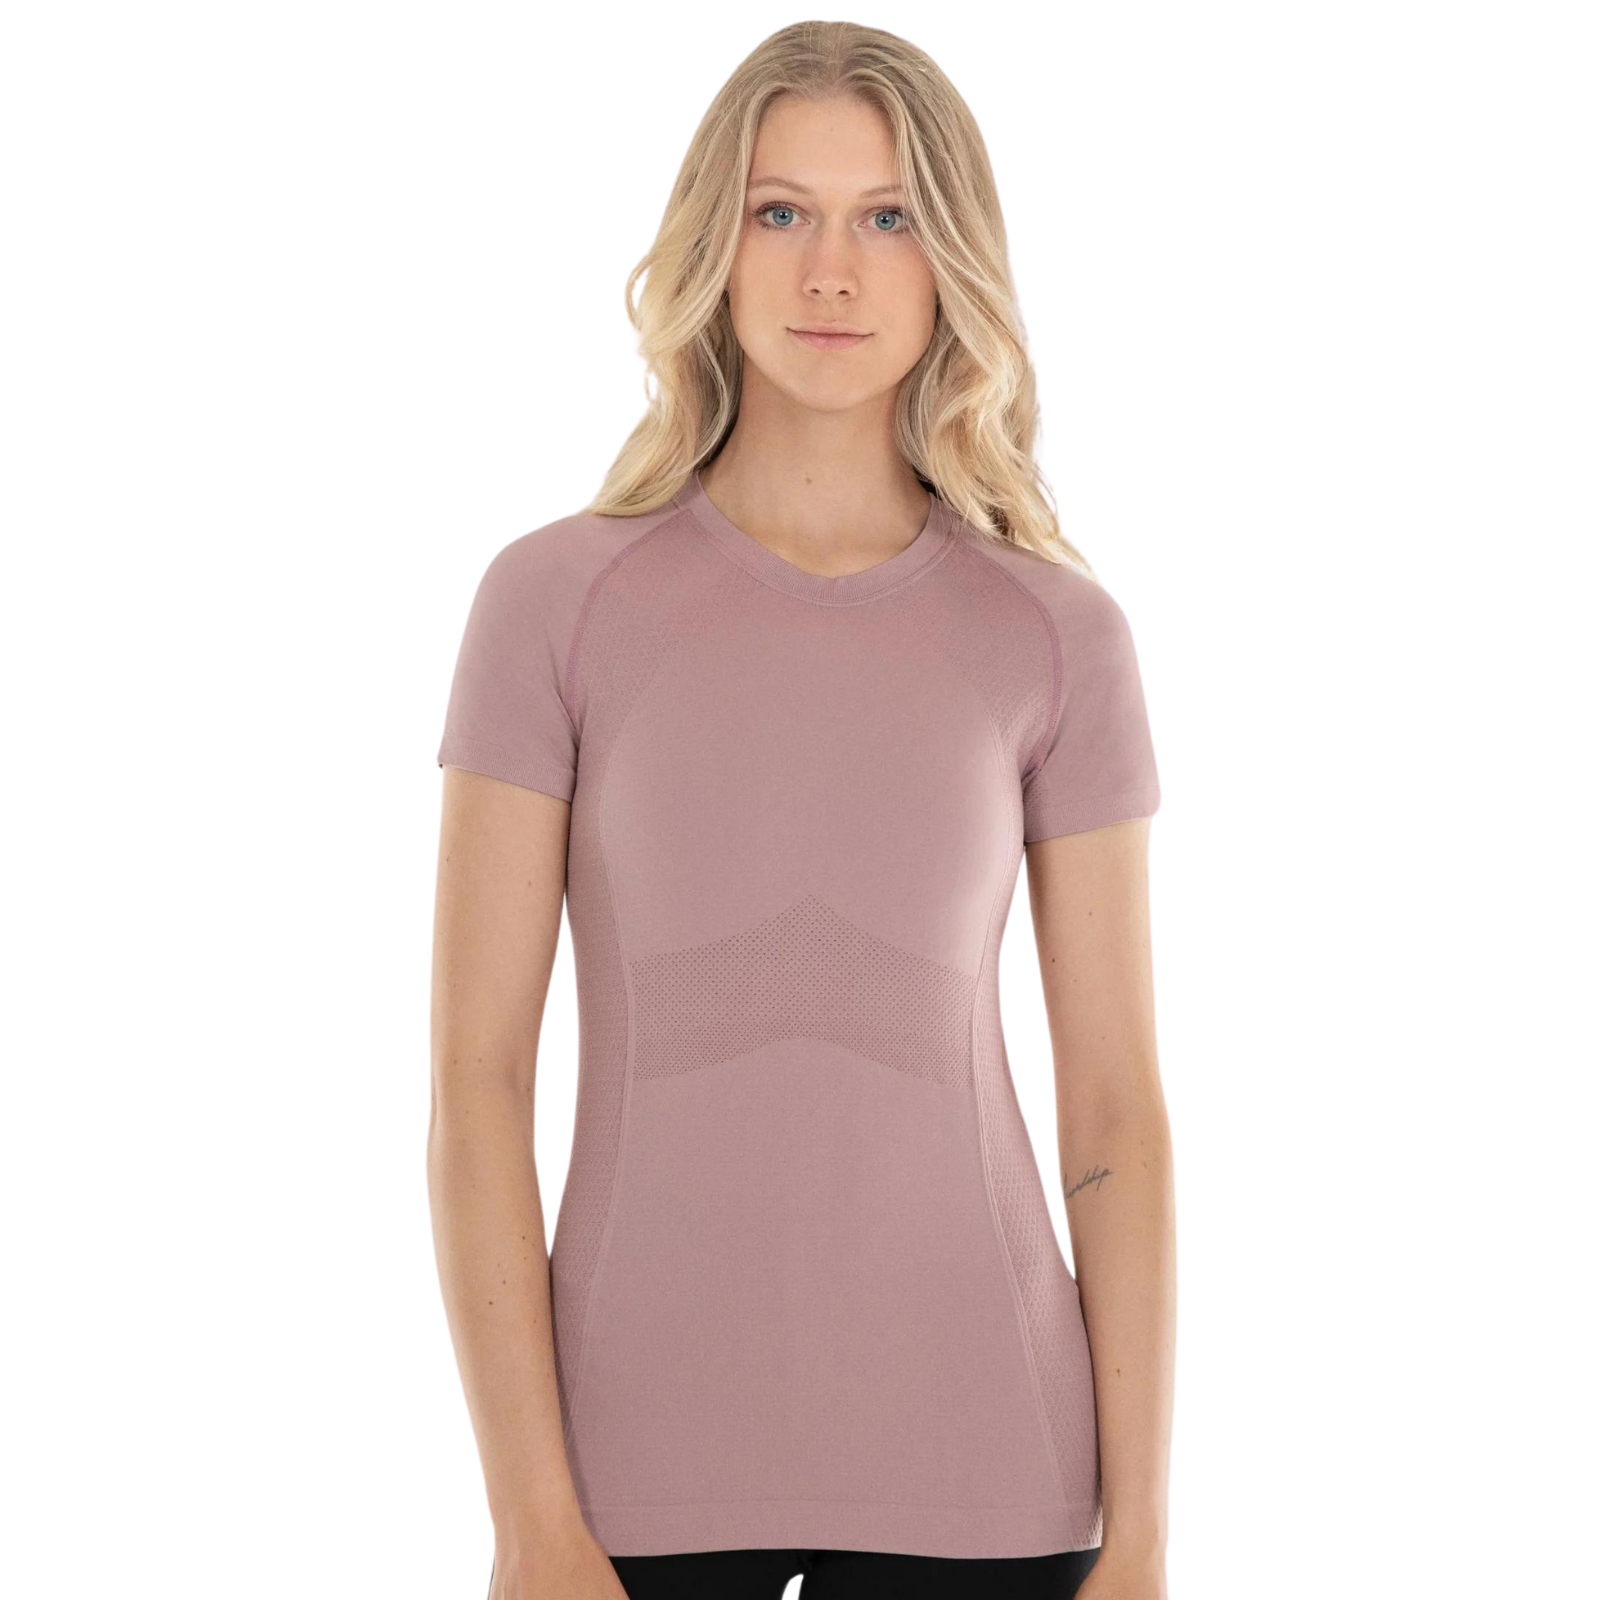 Anique Short Sleeve Crew Shirt in Spiced Chai - Women&#39;s XS (0-2)